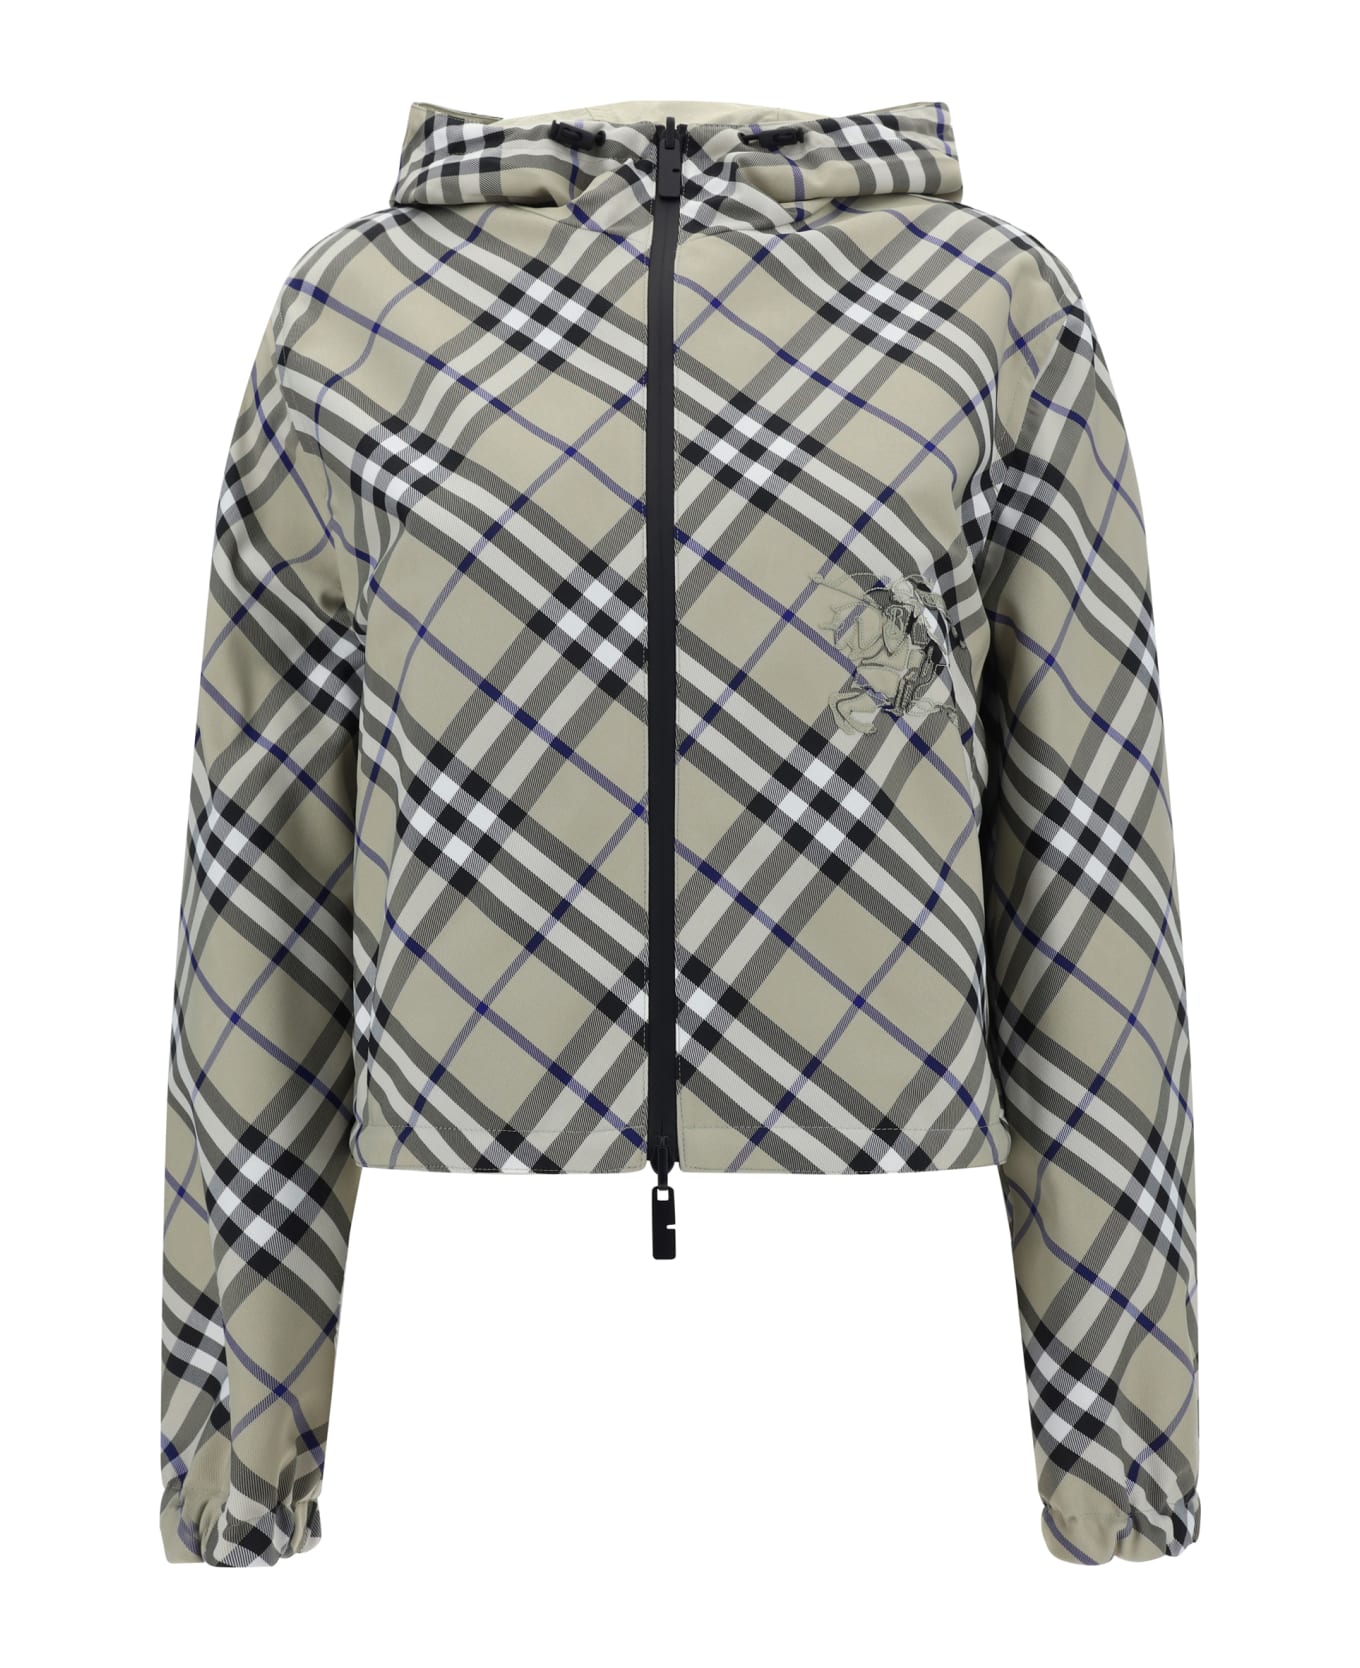 Burberry Reversible Cropped Checked Hooded Jacket - Lichen Ip Check ジャケット